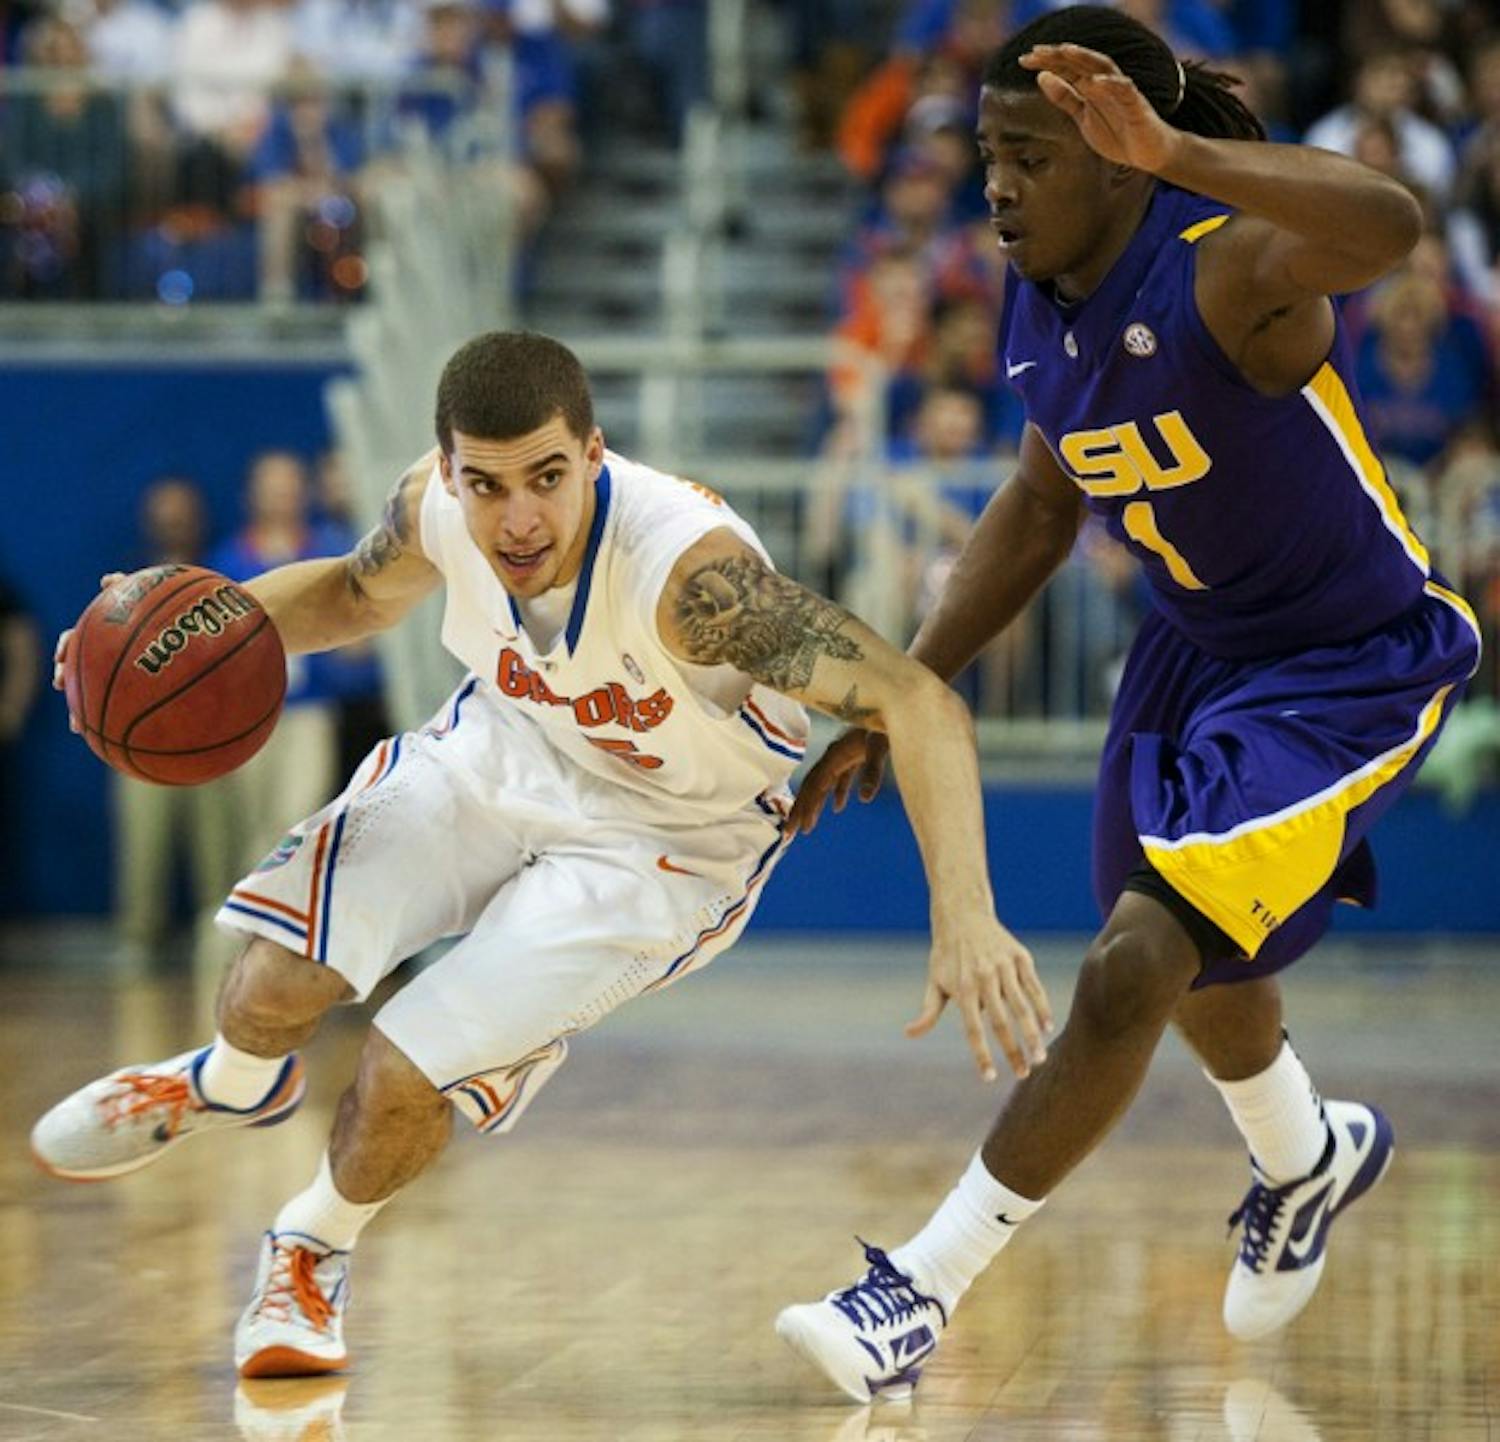 Sophomore guard Scottie Wilbekin is playing 3.4 fewer minutes per game this season after the additions of freshman Brad Beal and junior Mike Rosario to Florida’s backcourt rotation.